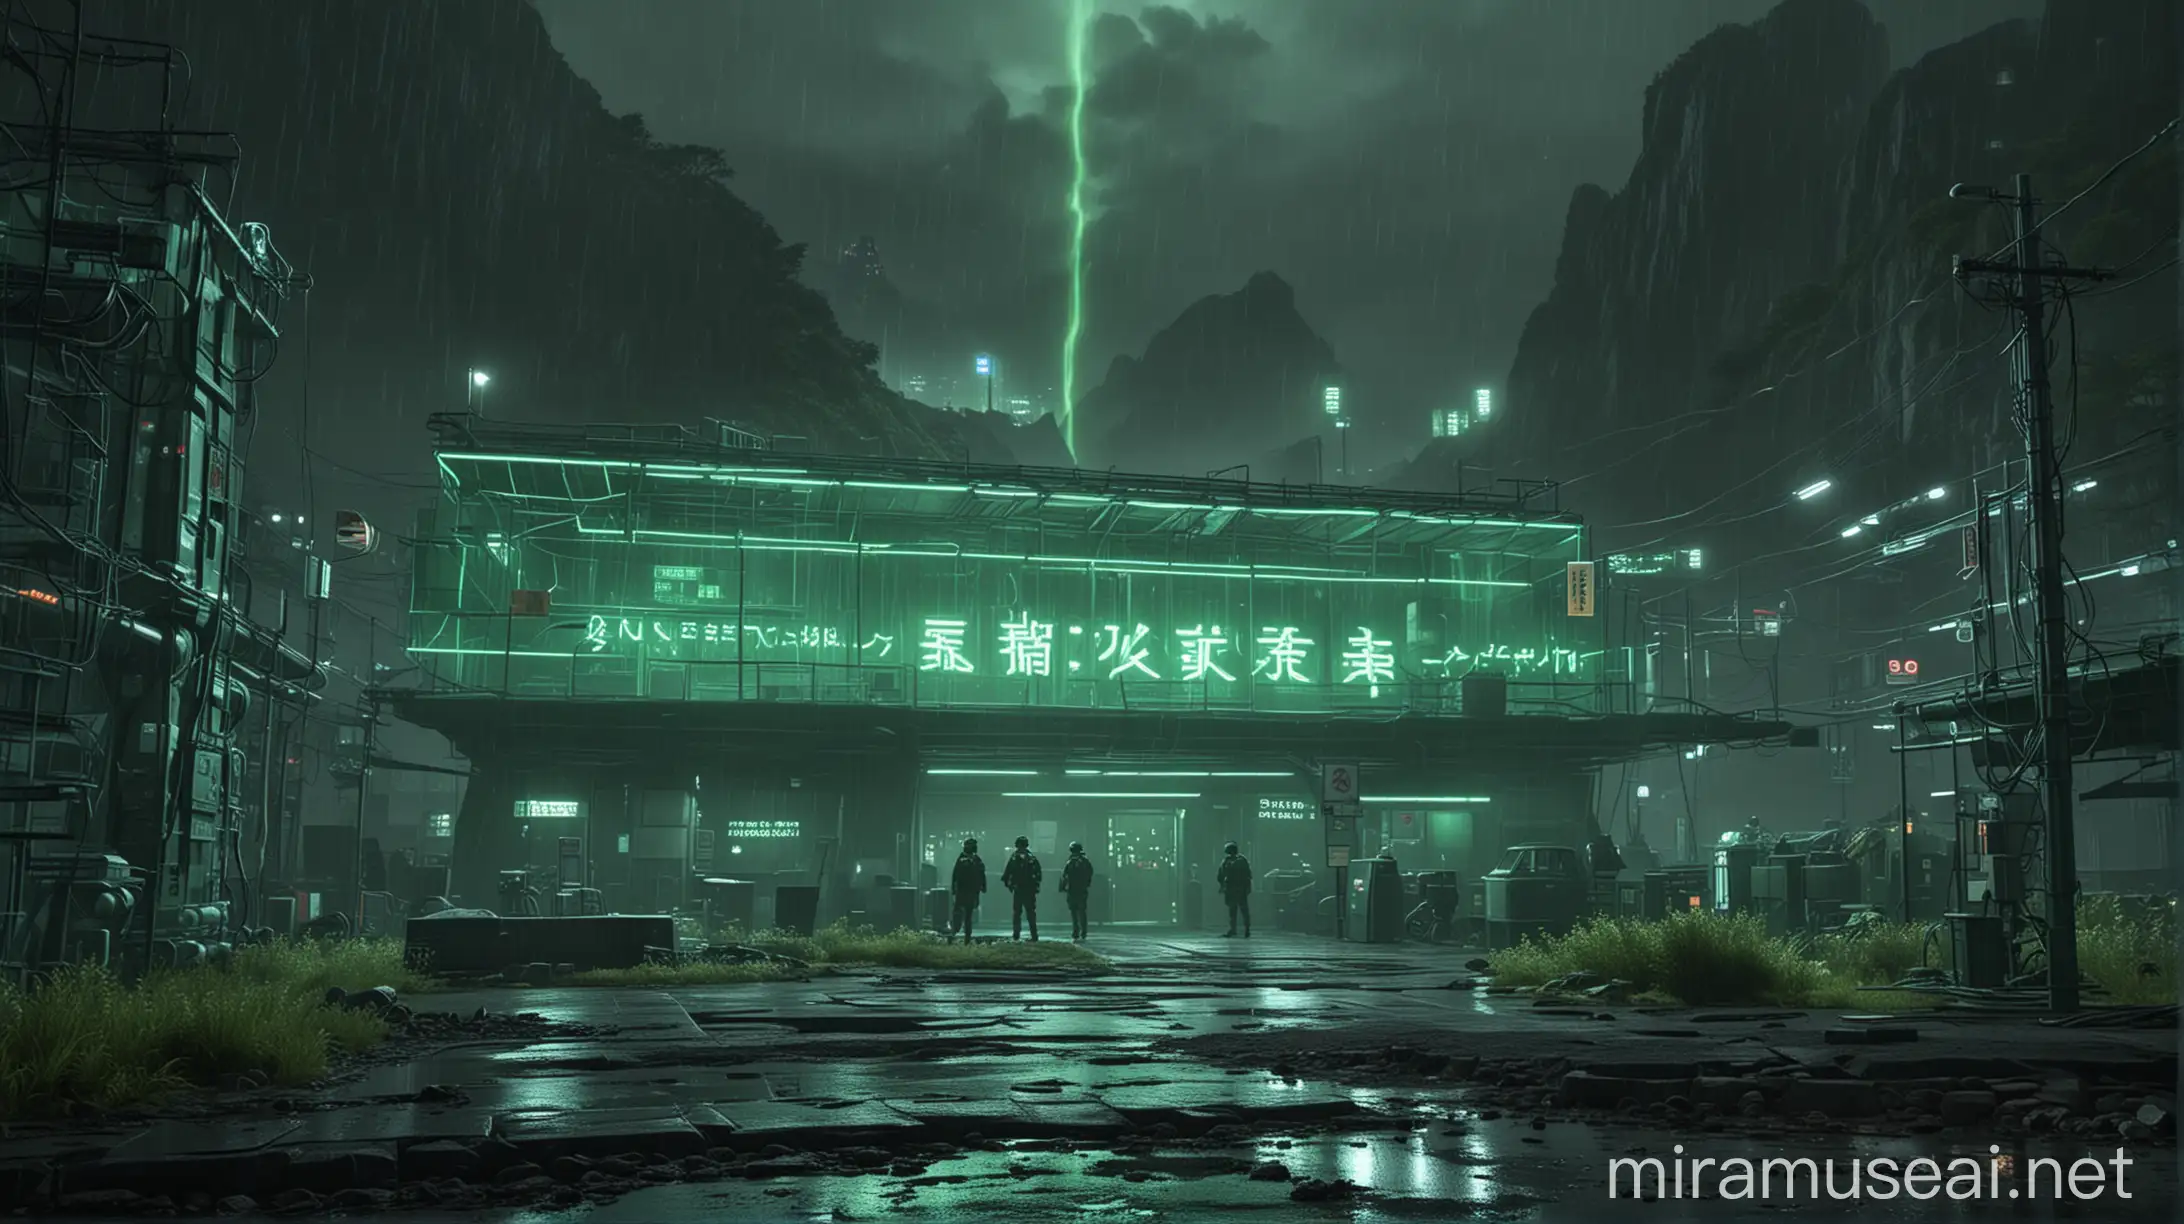 Cinematic Japanese Research Center in Rainy Atmosphere with Neon Lights